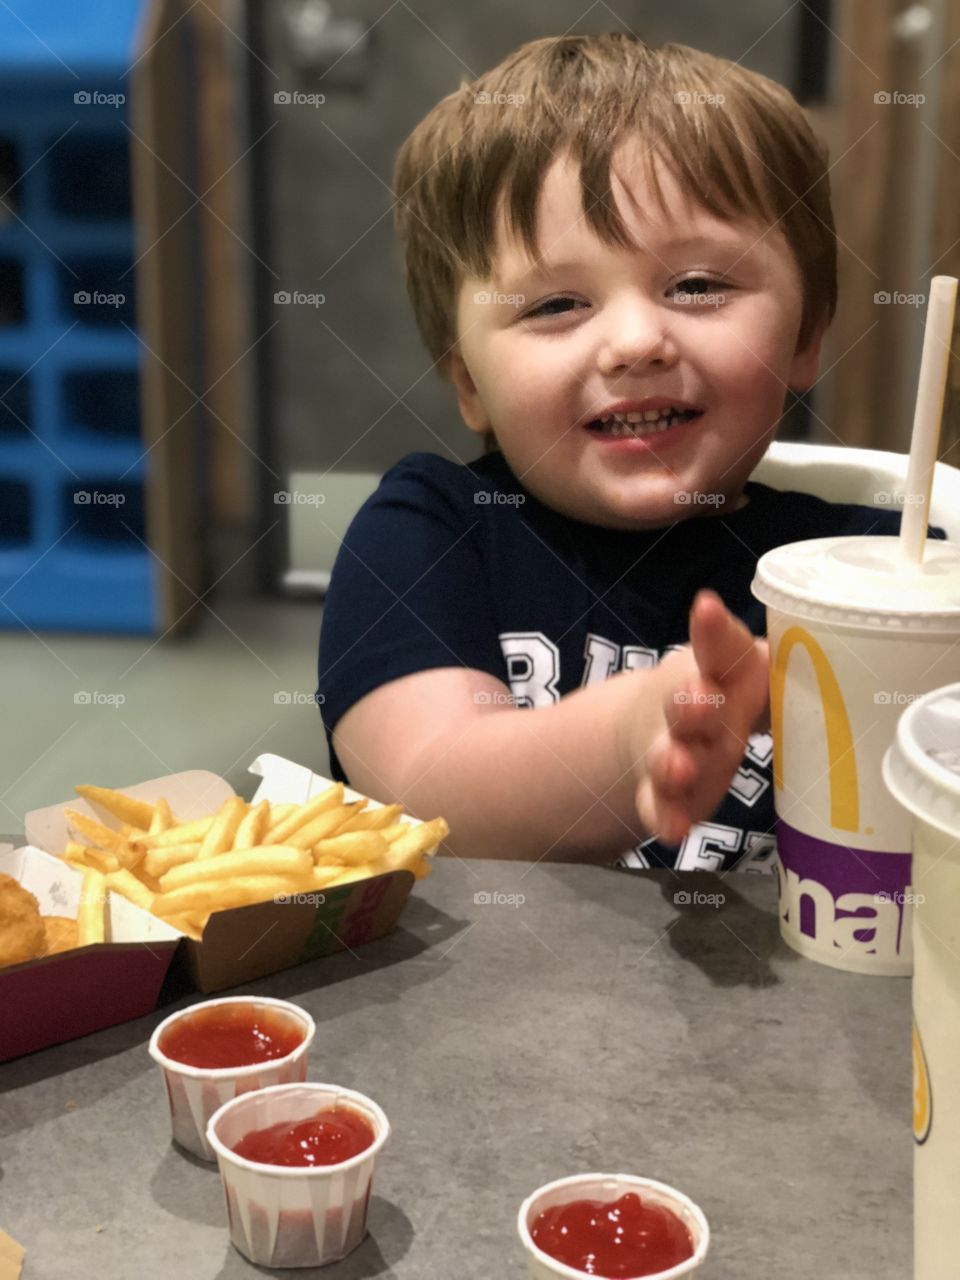 Mcdonalds meal time with the happiest little boy. 